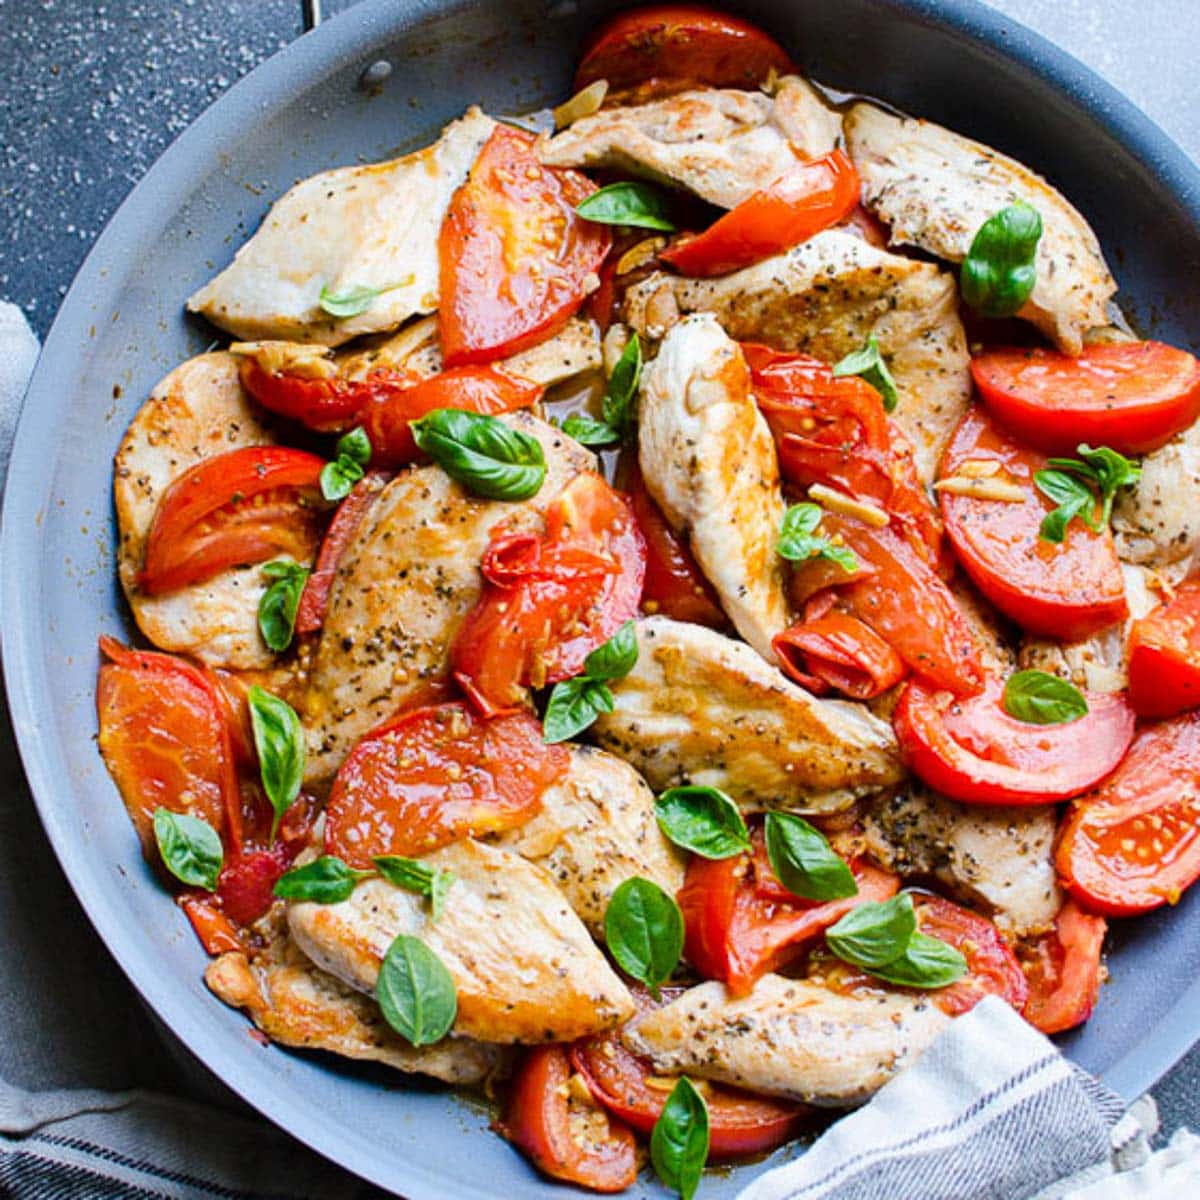 Chicken with tomatoes and garlic in a skillet garnished with basil.